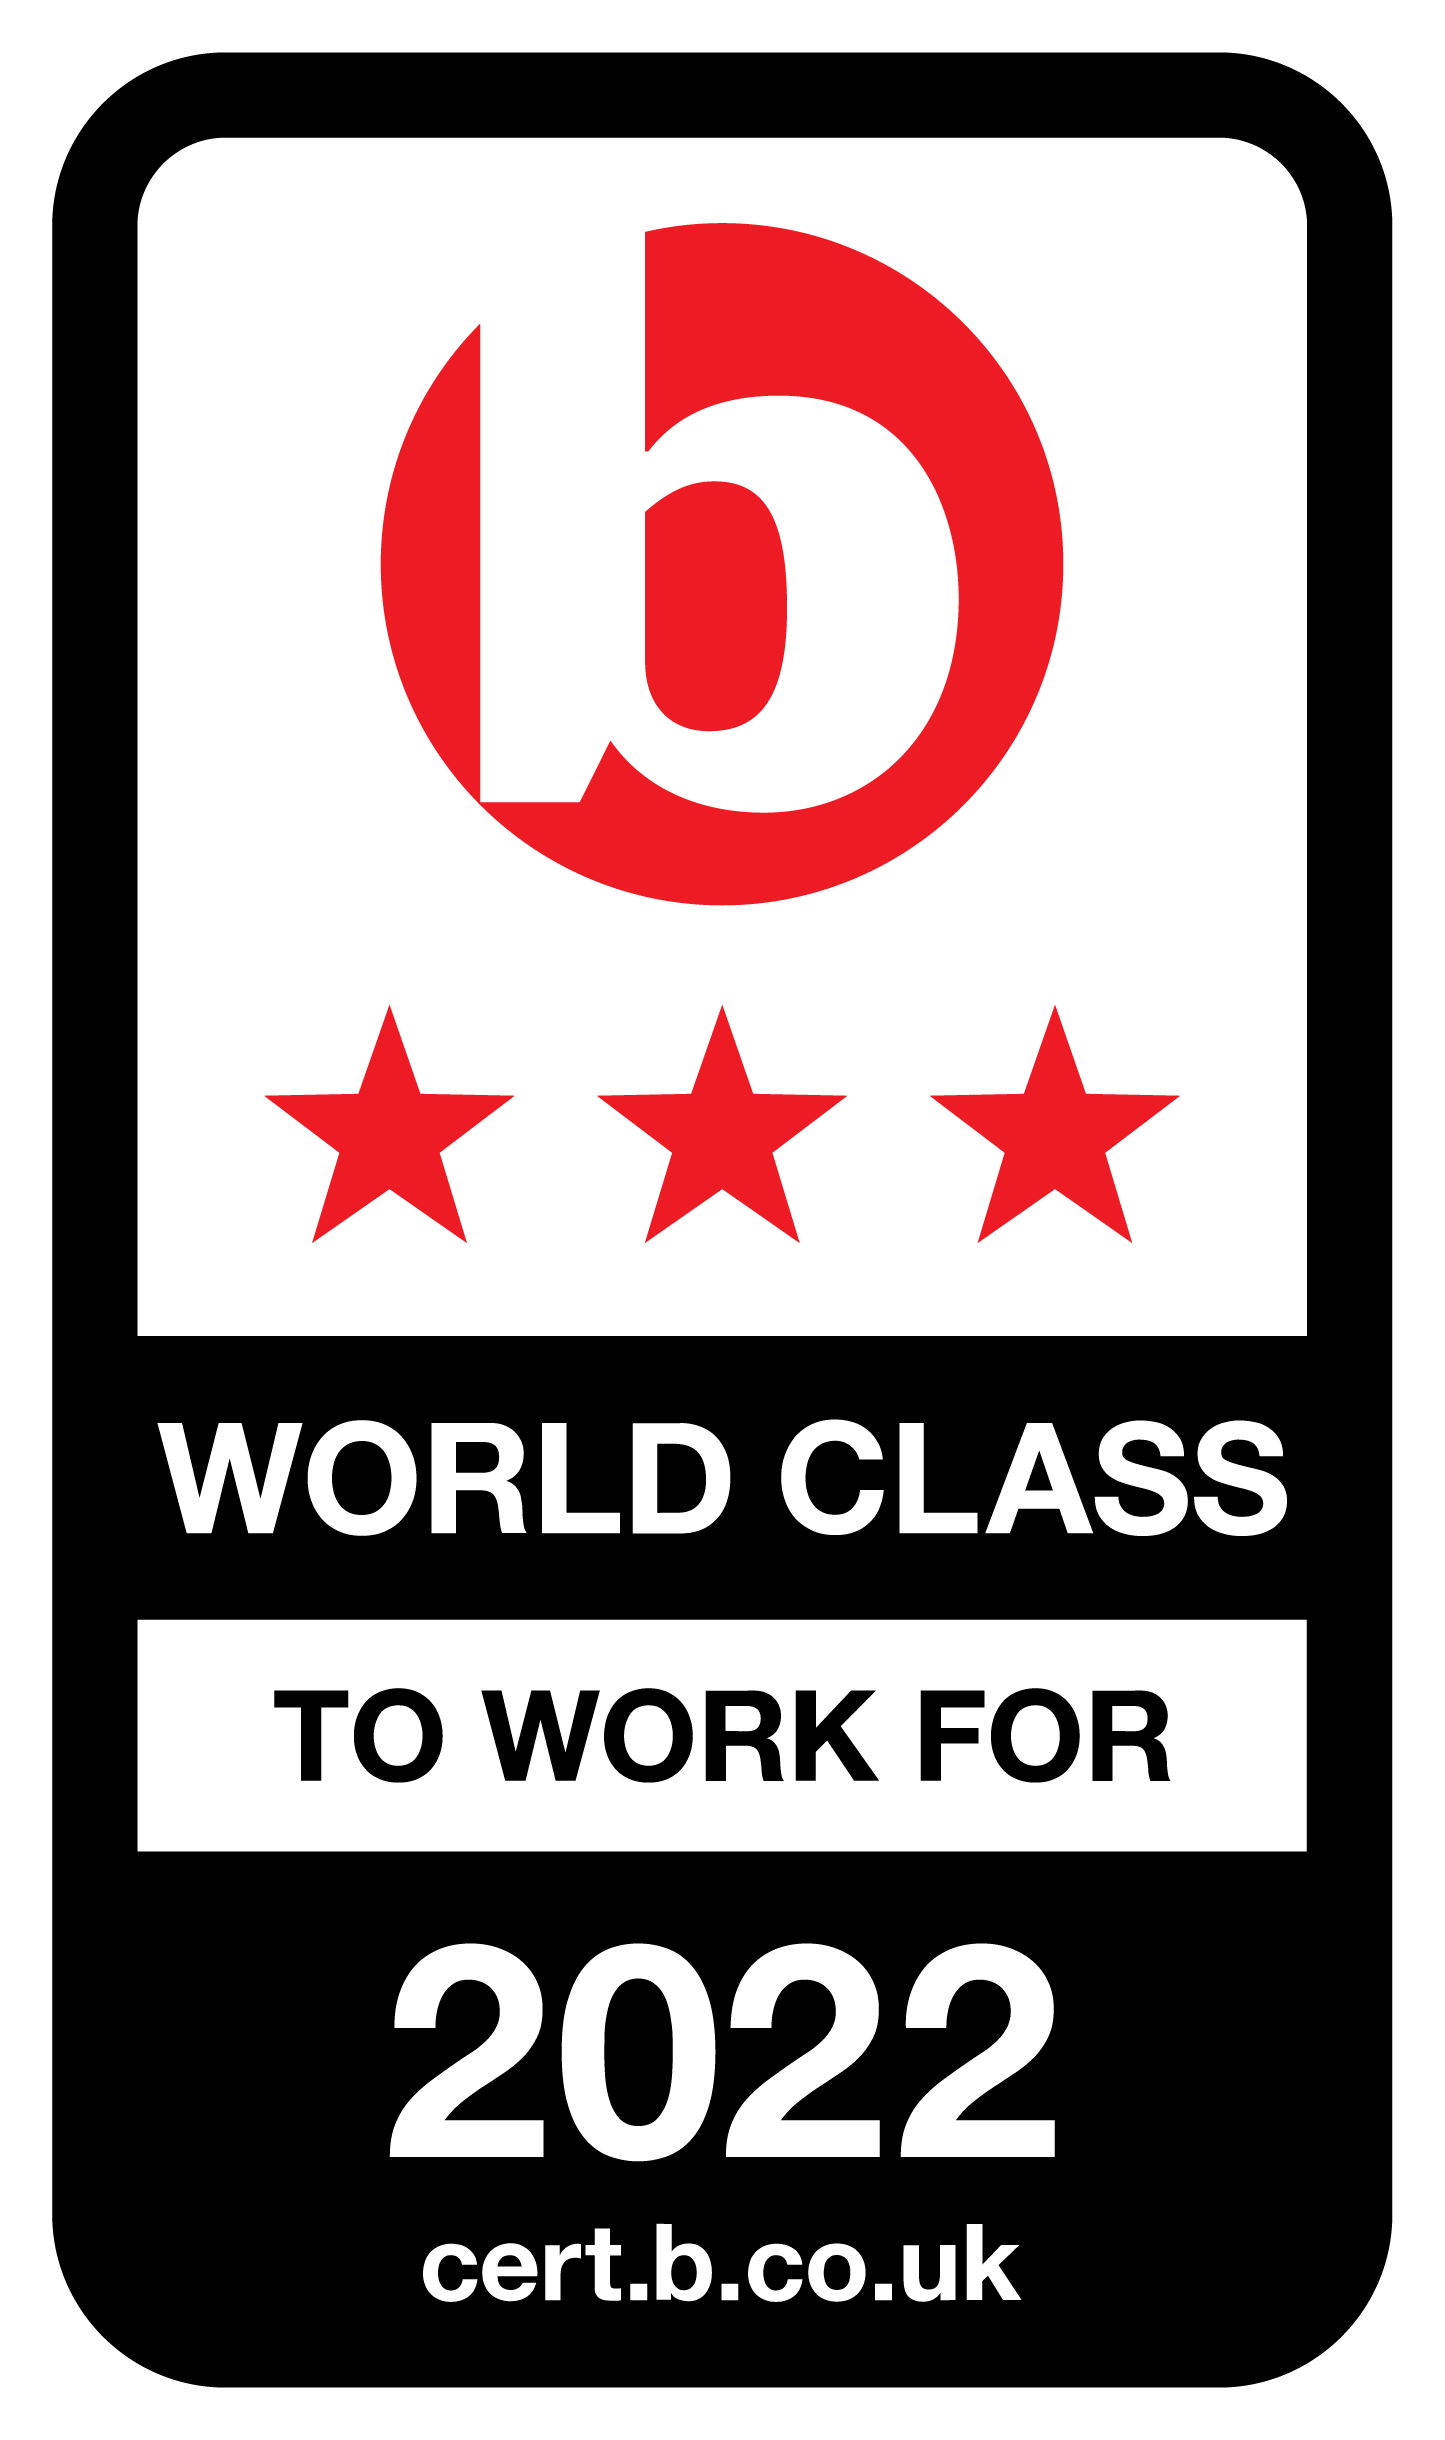 3 Star World Class Organisation to work for 